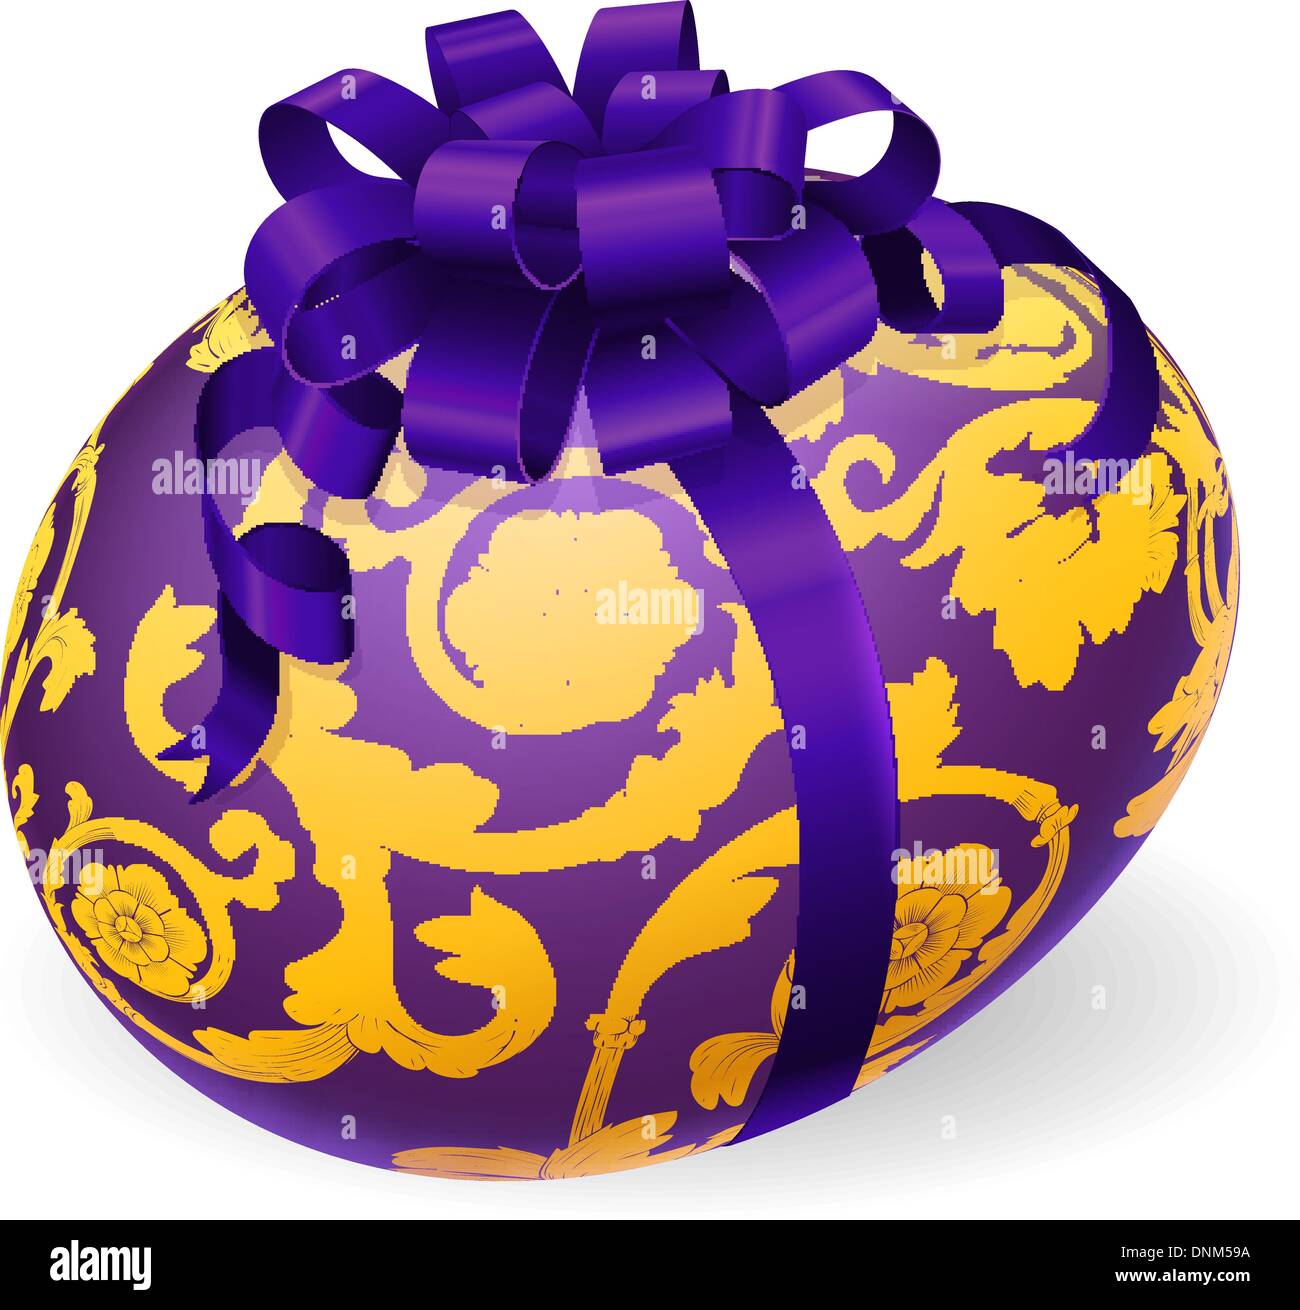 Illustration of a purple Easter egg with bow and ornate floral patterns Stock Vector